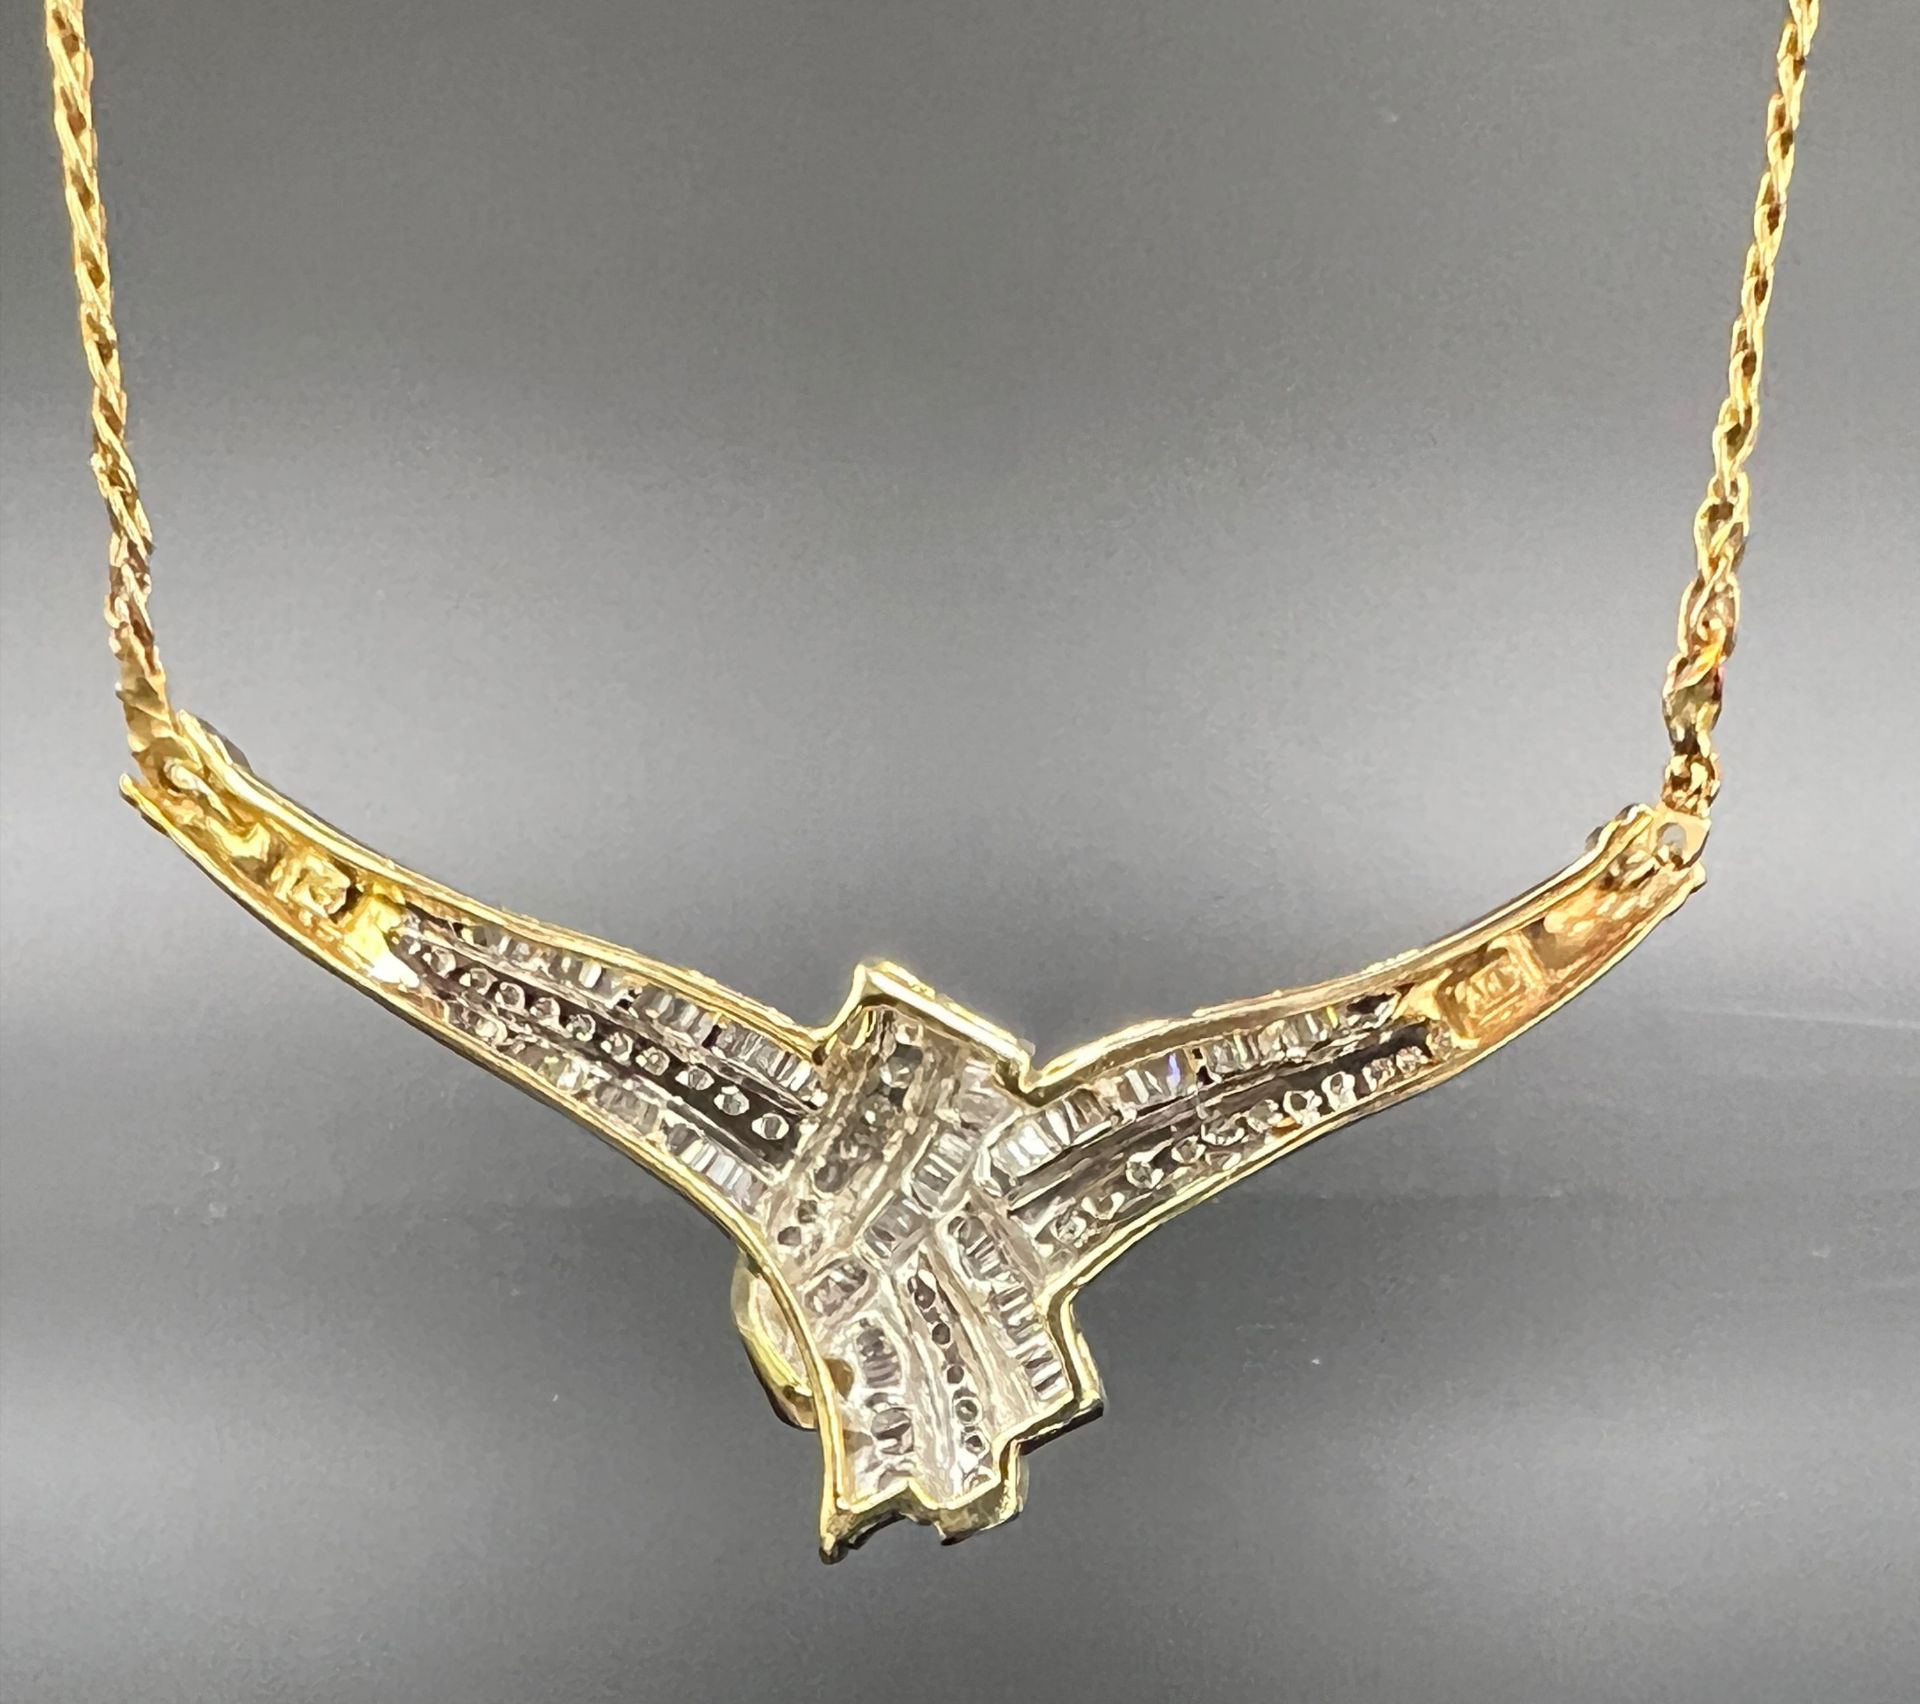 Necklace. 585 yellow gold and white gold with diamonds. - Image 4 of 10